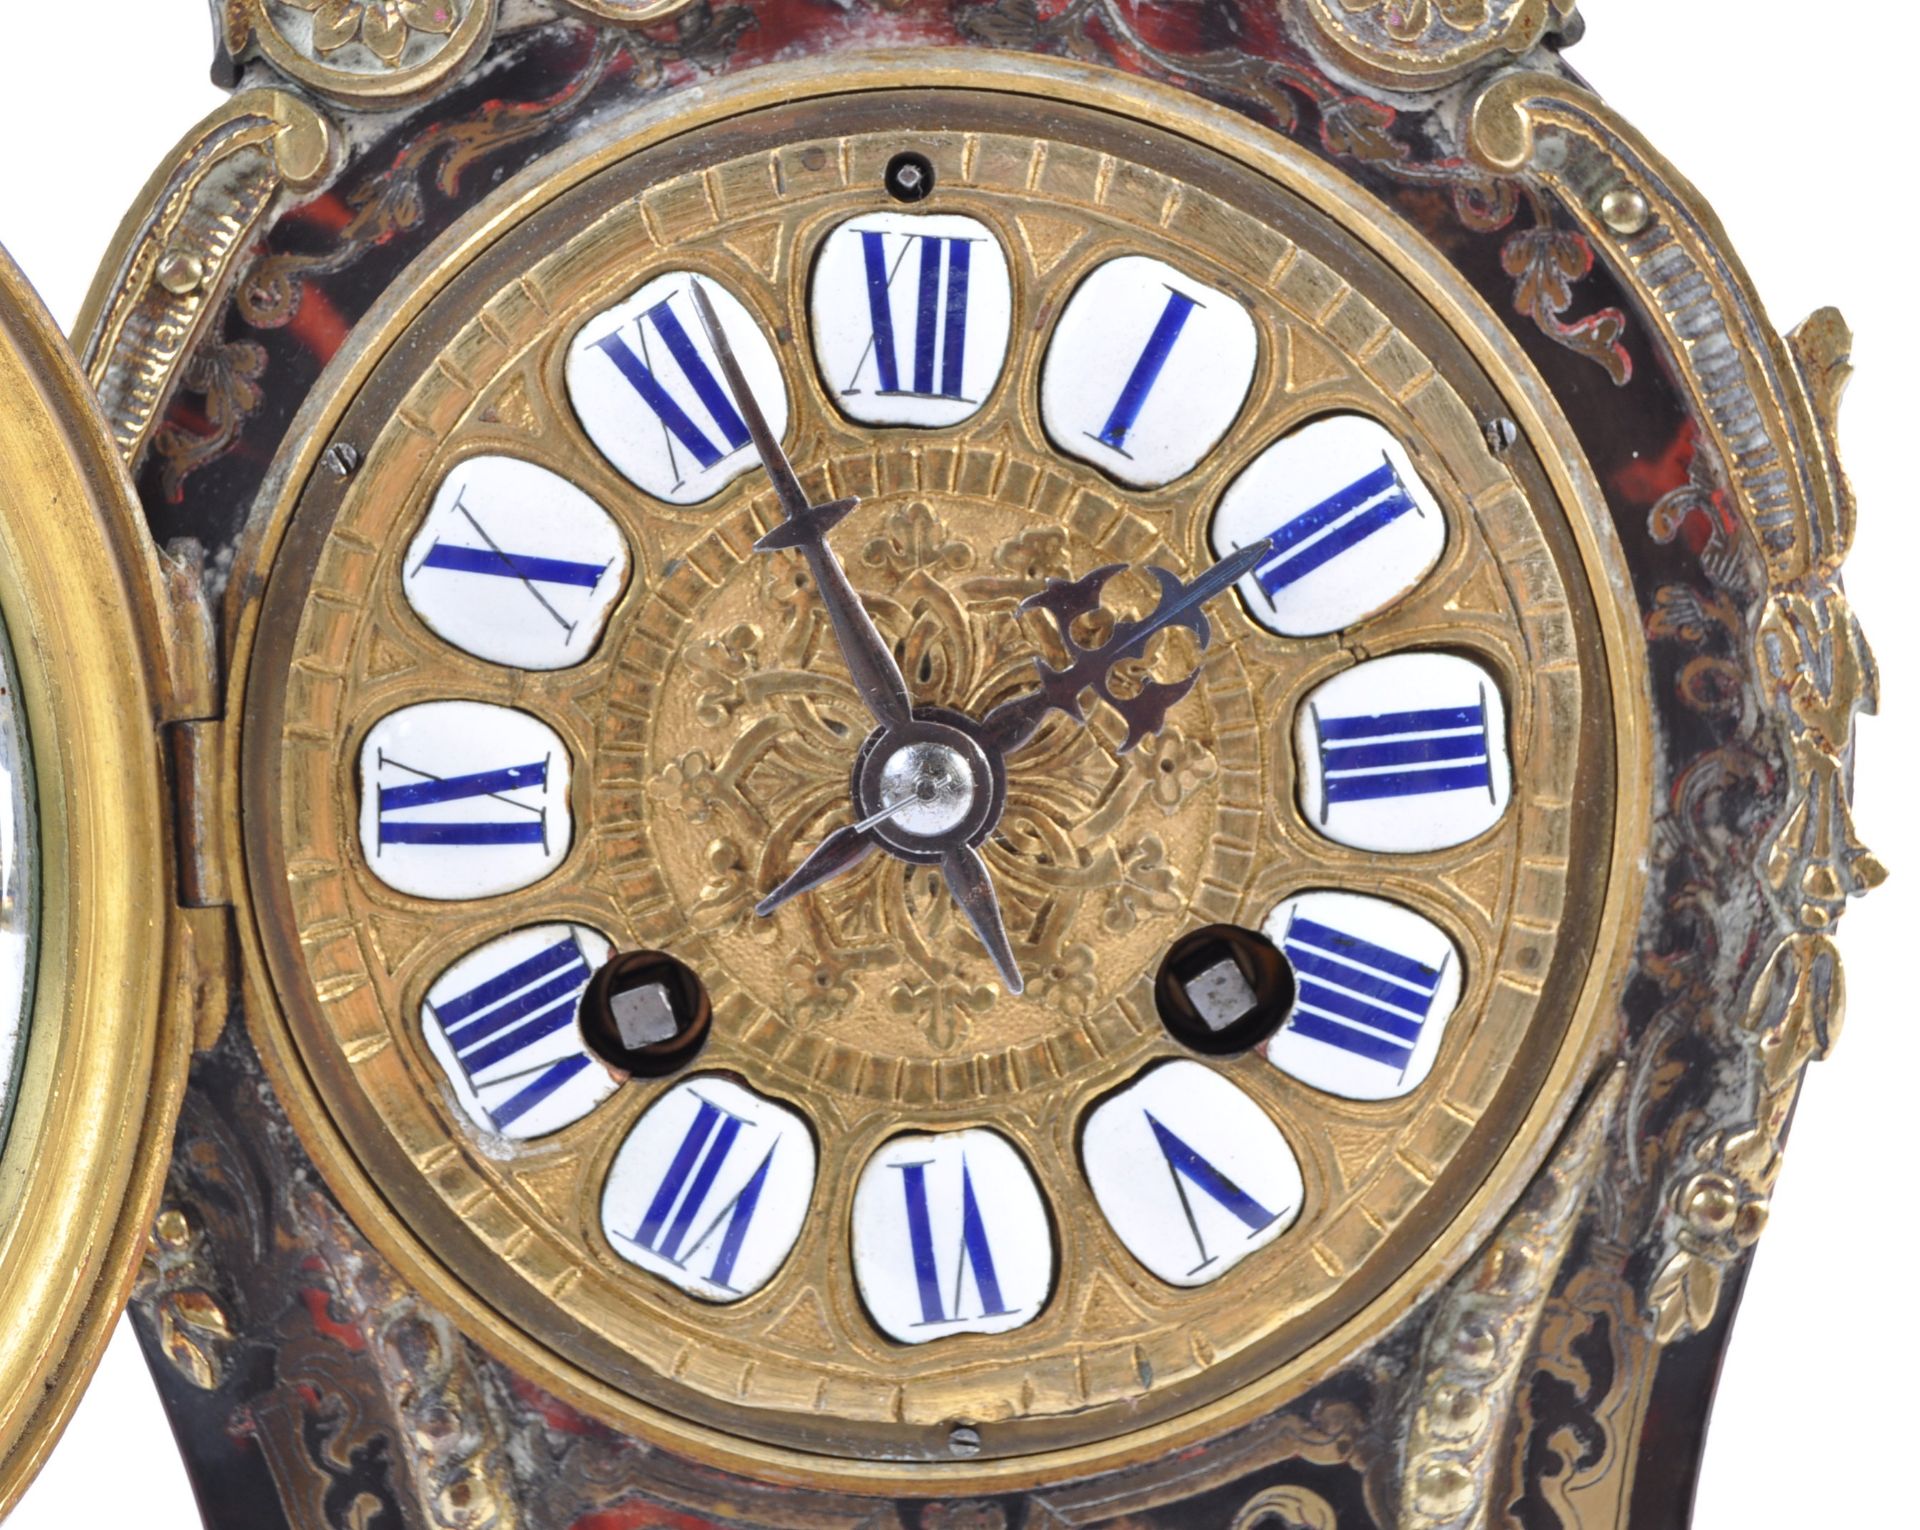 AD MOUGIN OF PARIS FRENCH BOULLEWORK MANTLE CLOCK - Image 3 of 7